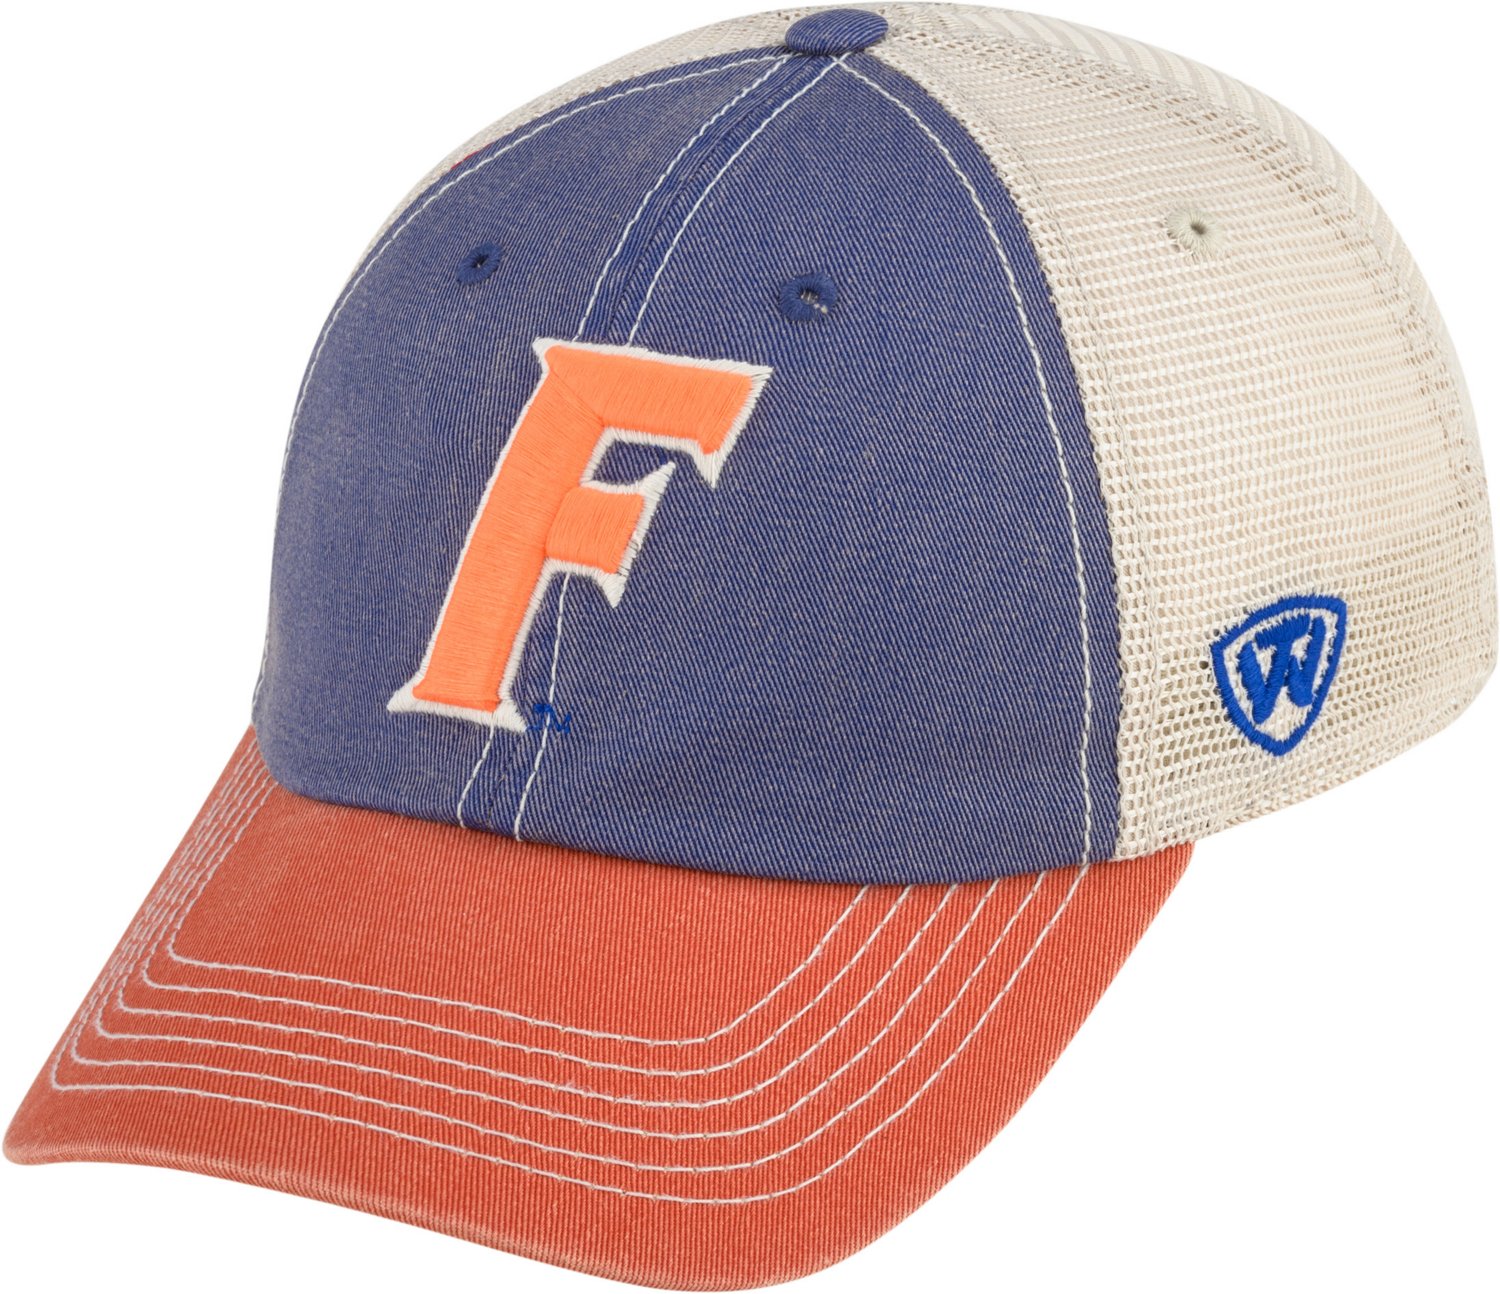 Top of the World Men's University of Florida Off-road Adjustable Cap                                                             - view number 1 selected